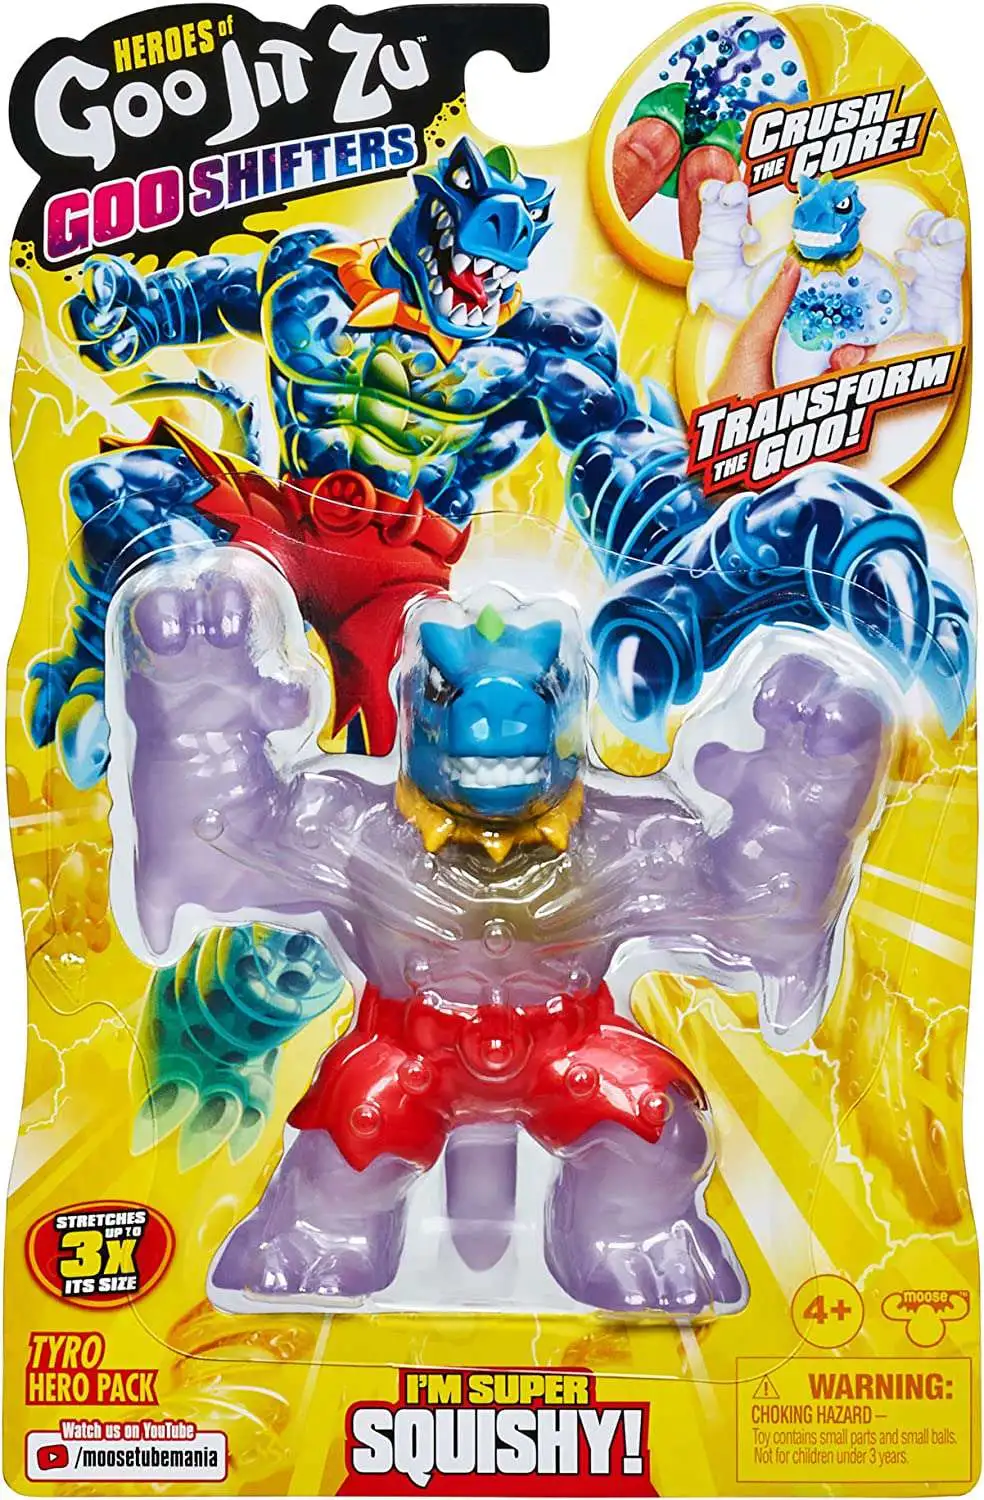 Heroes of Goo JIT Zu Dino Power Action Figure Stretches up to 3x Original Size for sale online 